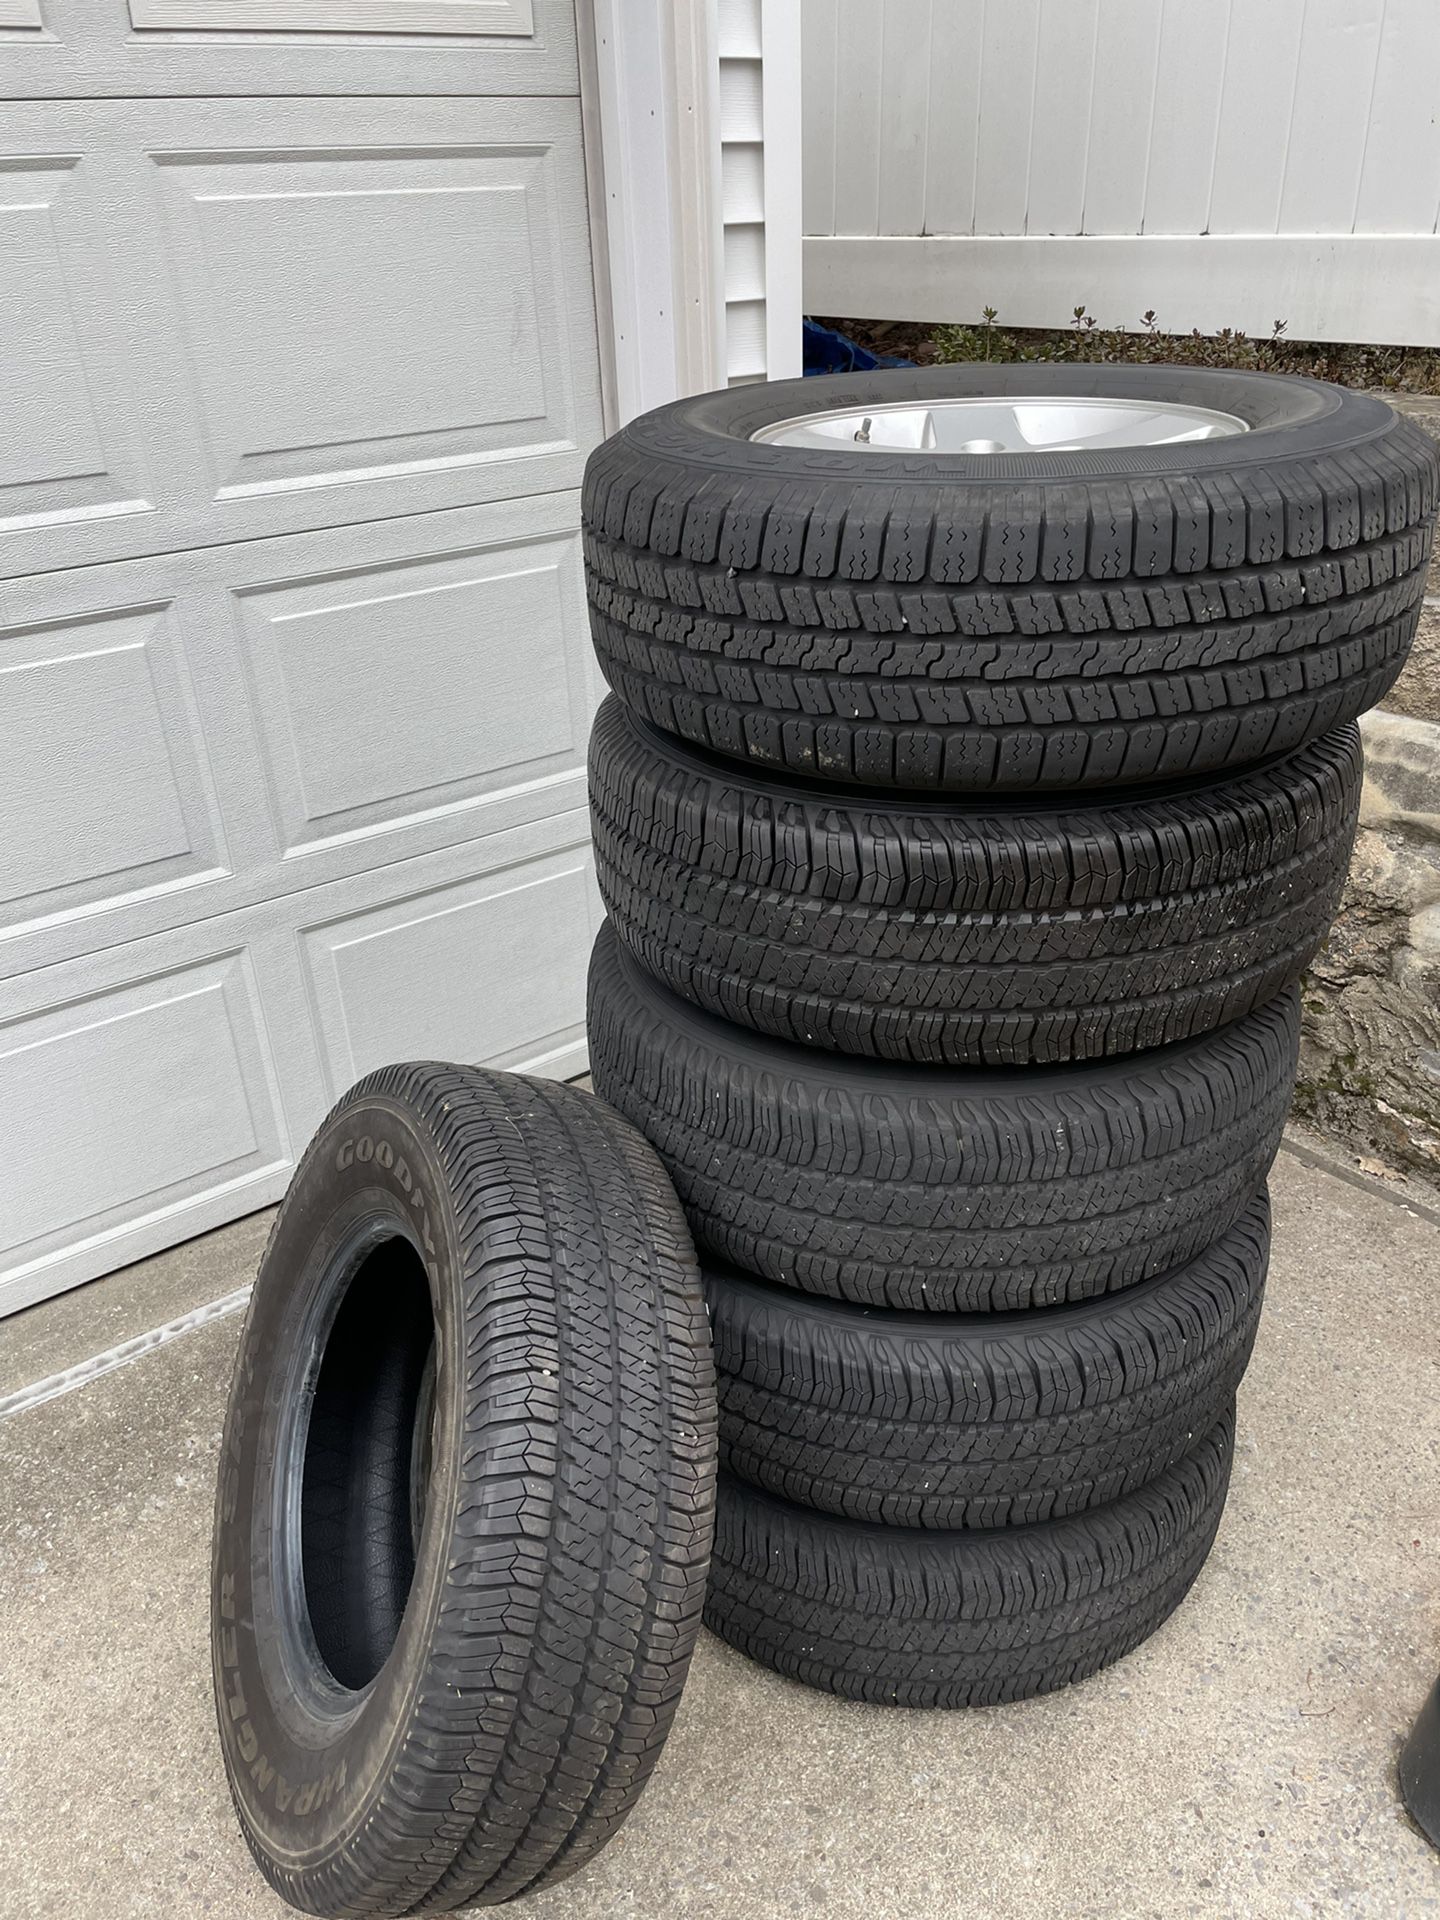 Jeep Wrangler Wheels, Tires, And Sensors (Goodyear Wrangler 255/75 R17) for  Sale in Scarsdale, NY - OfferUp